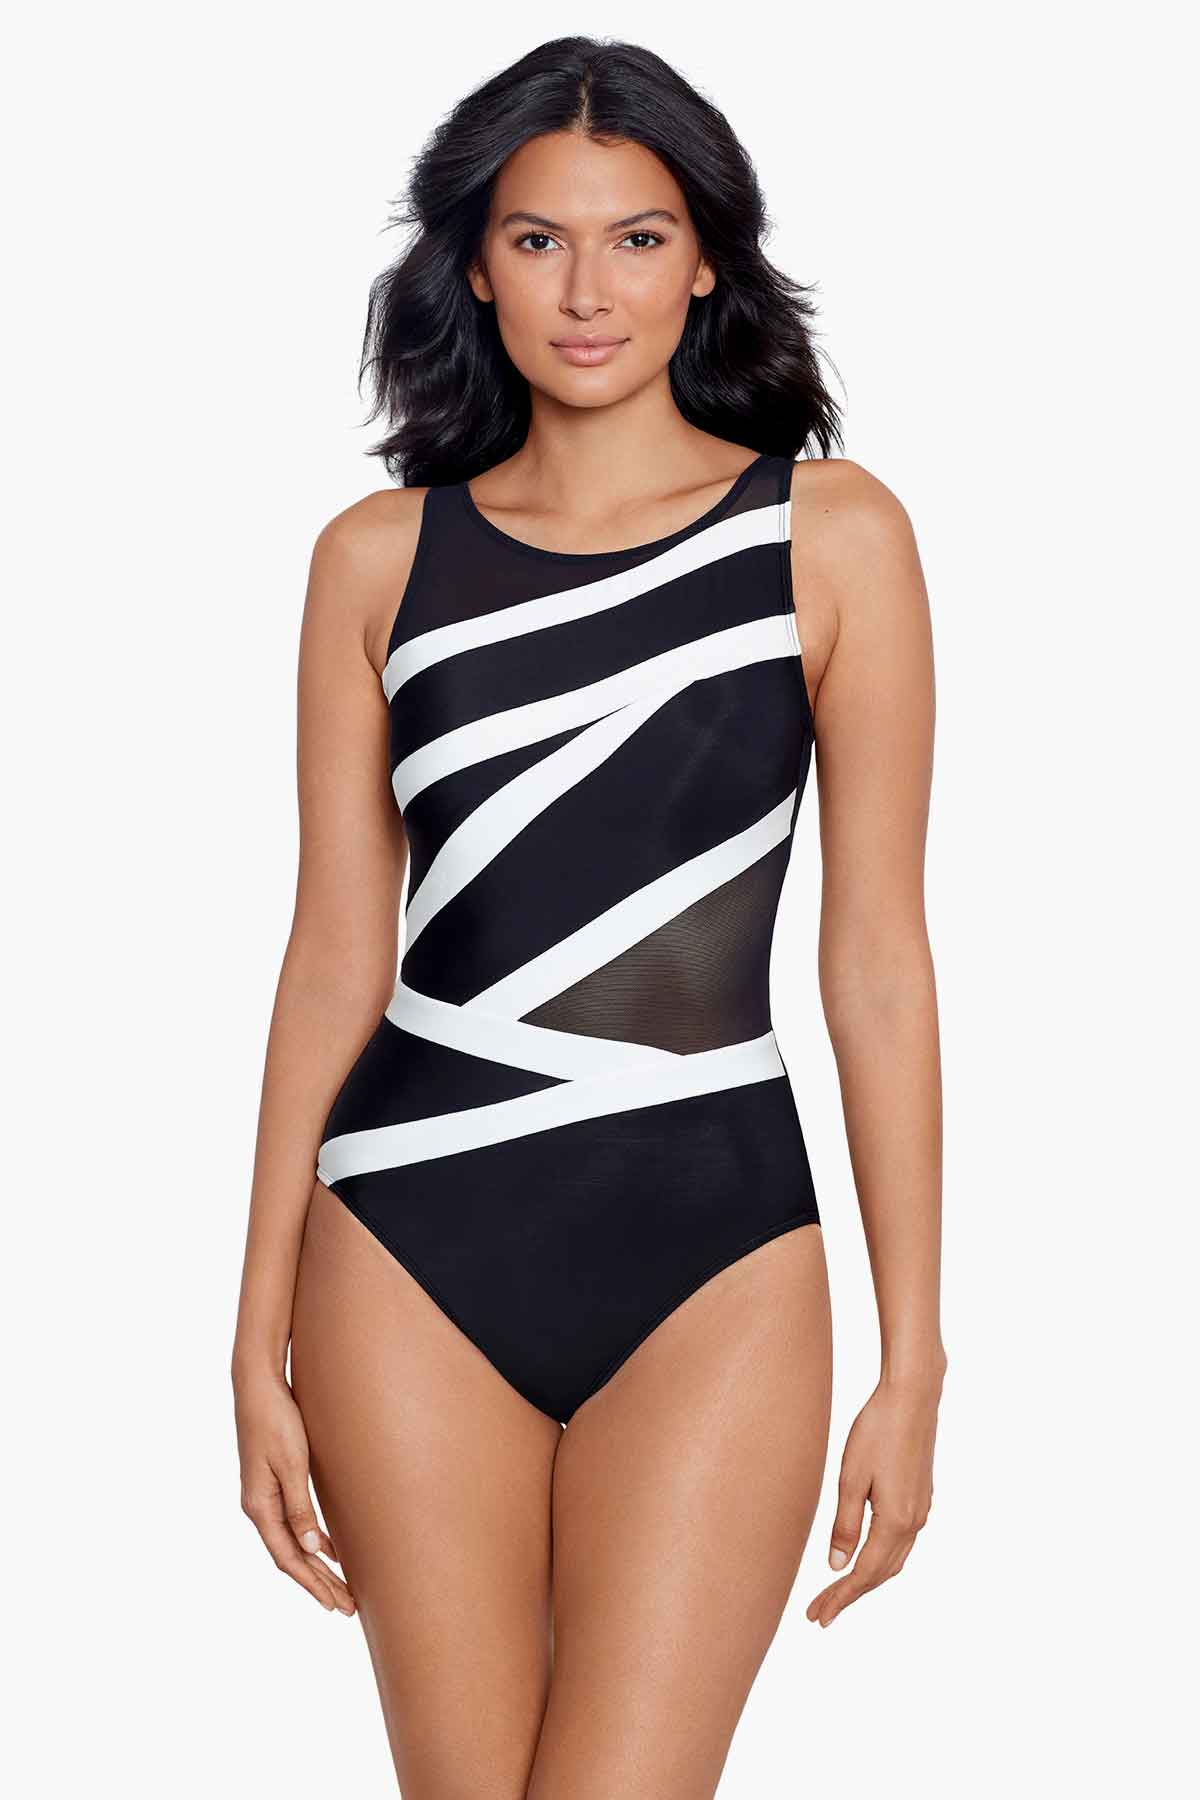 Sculpting Corset Swimsuits, Sculpting Corset Swimsuits Tie in Back, Women  One Piece Tummy Control Shapewear Swimsuits (Black,S)